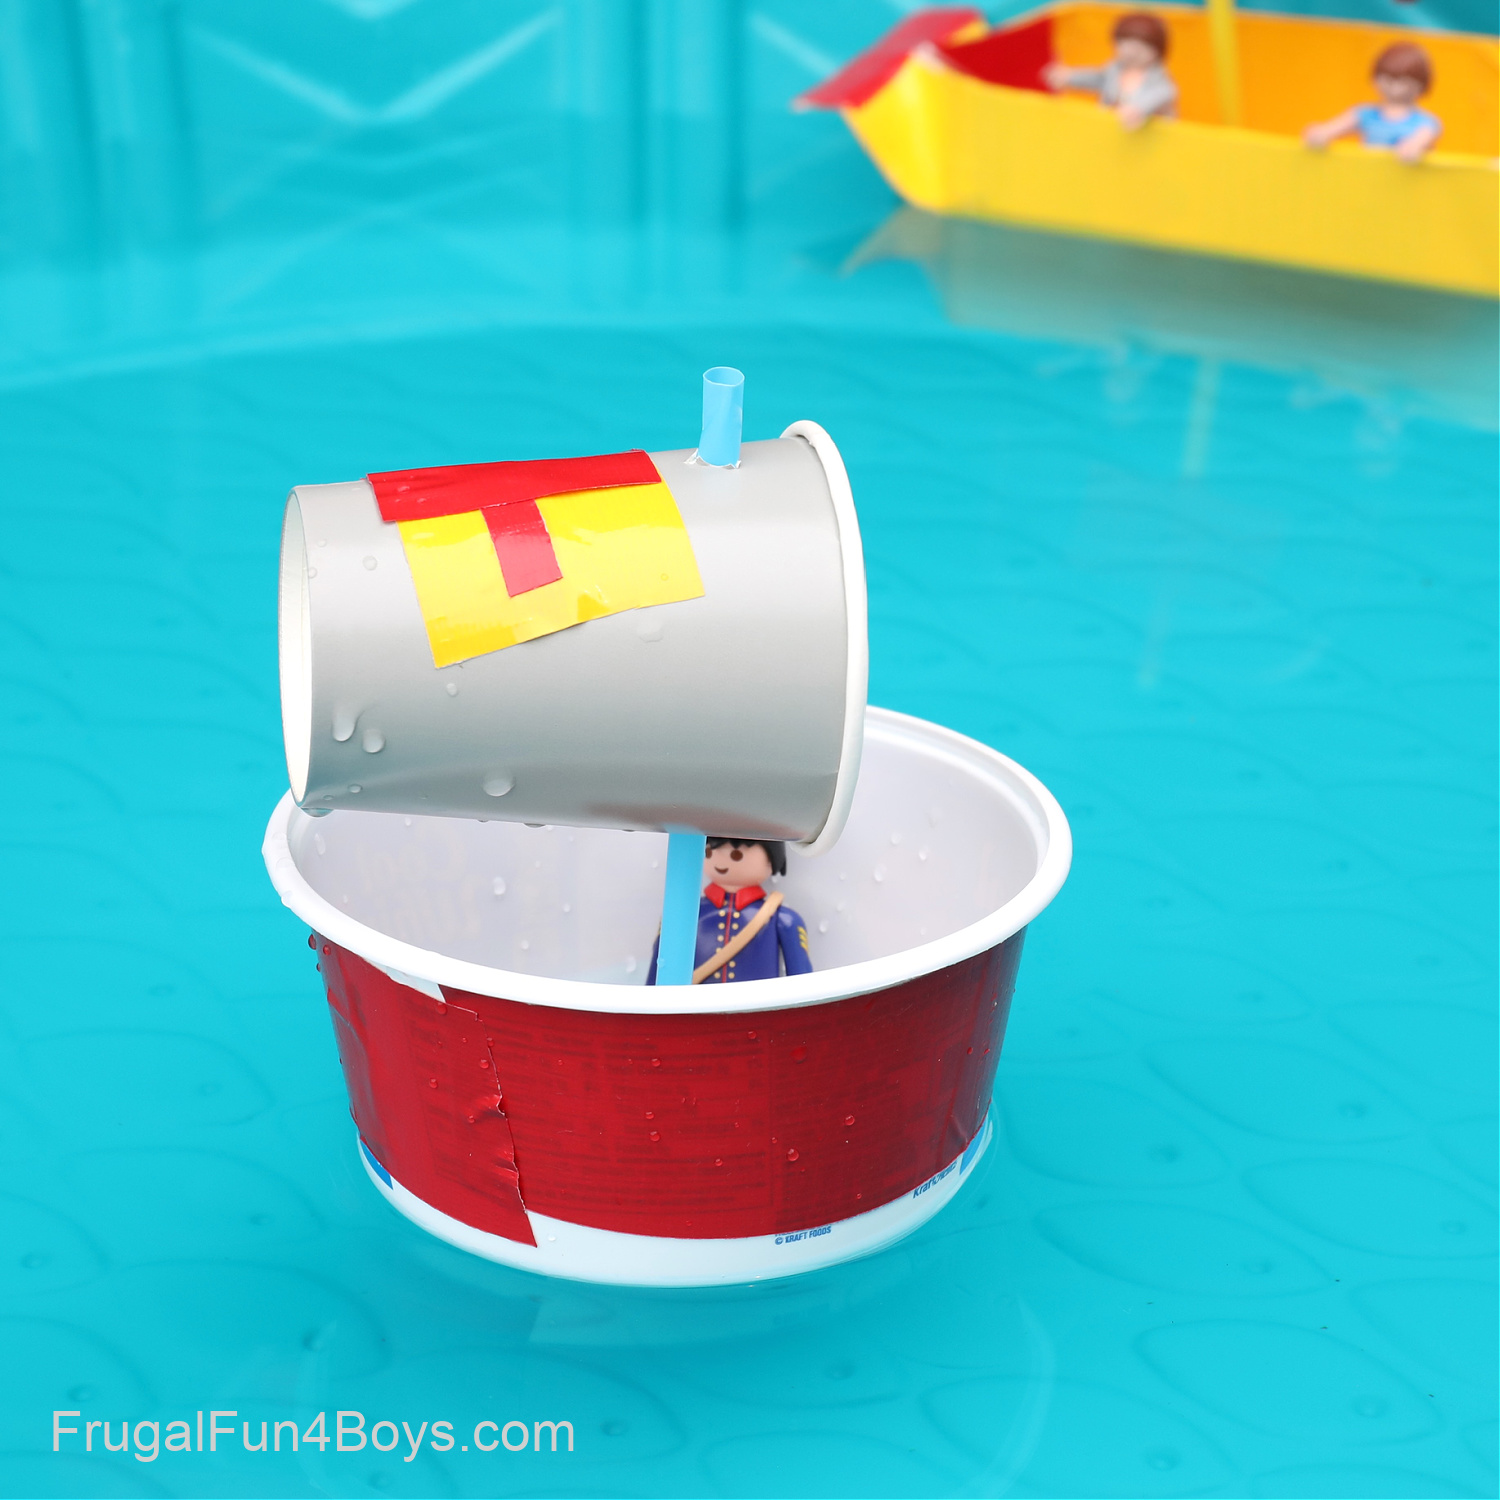 Building Boats from Recycled Materials - Frugal Fun For Boys and Girls